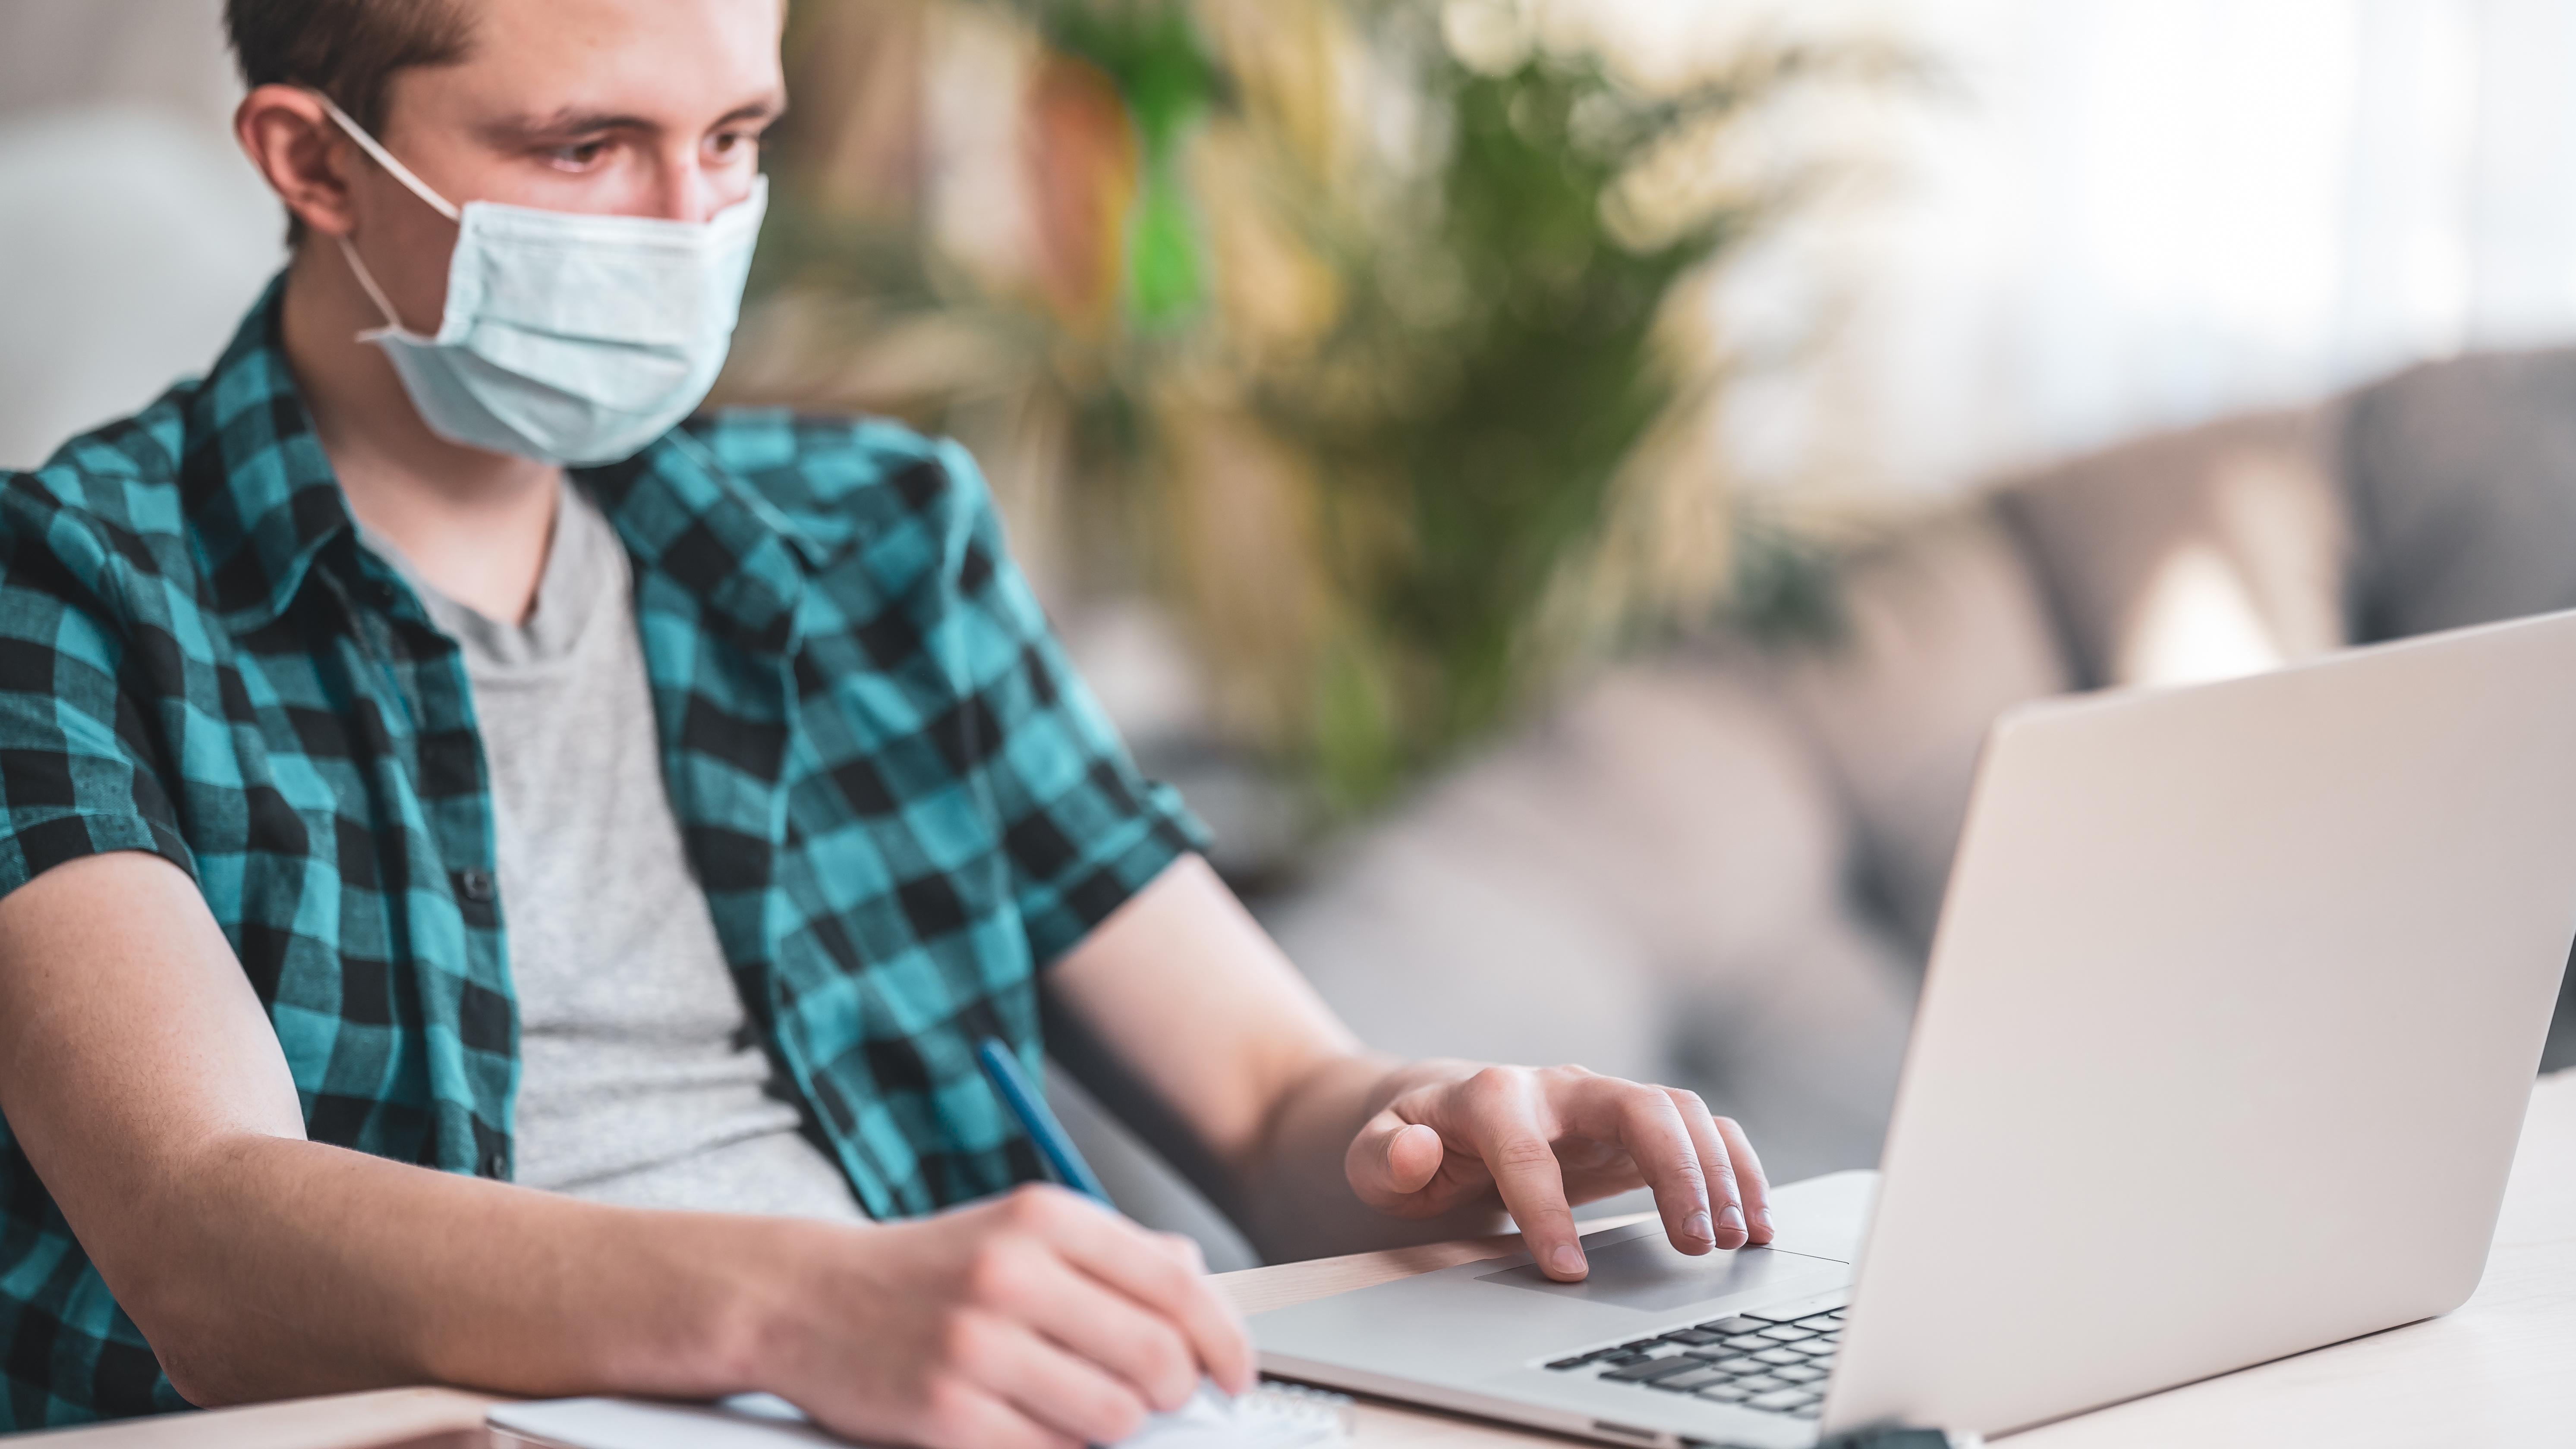 active teenager in mask and headphones with laptop during coronavirus quarantine